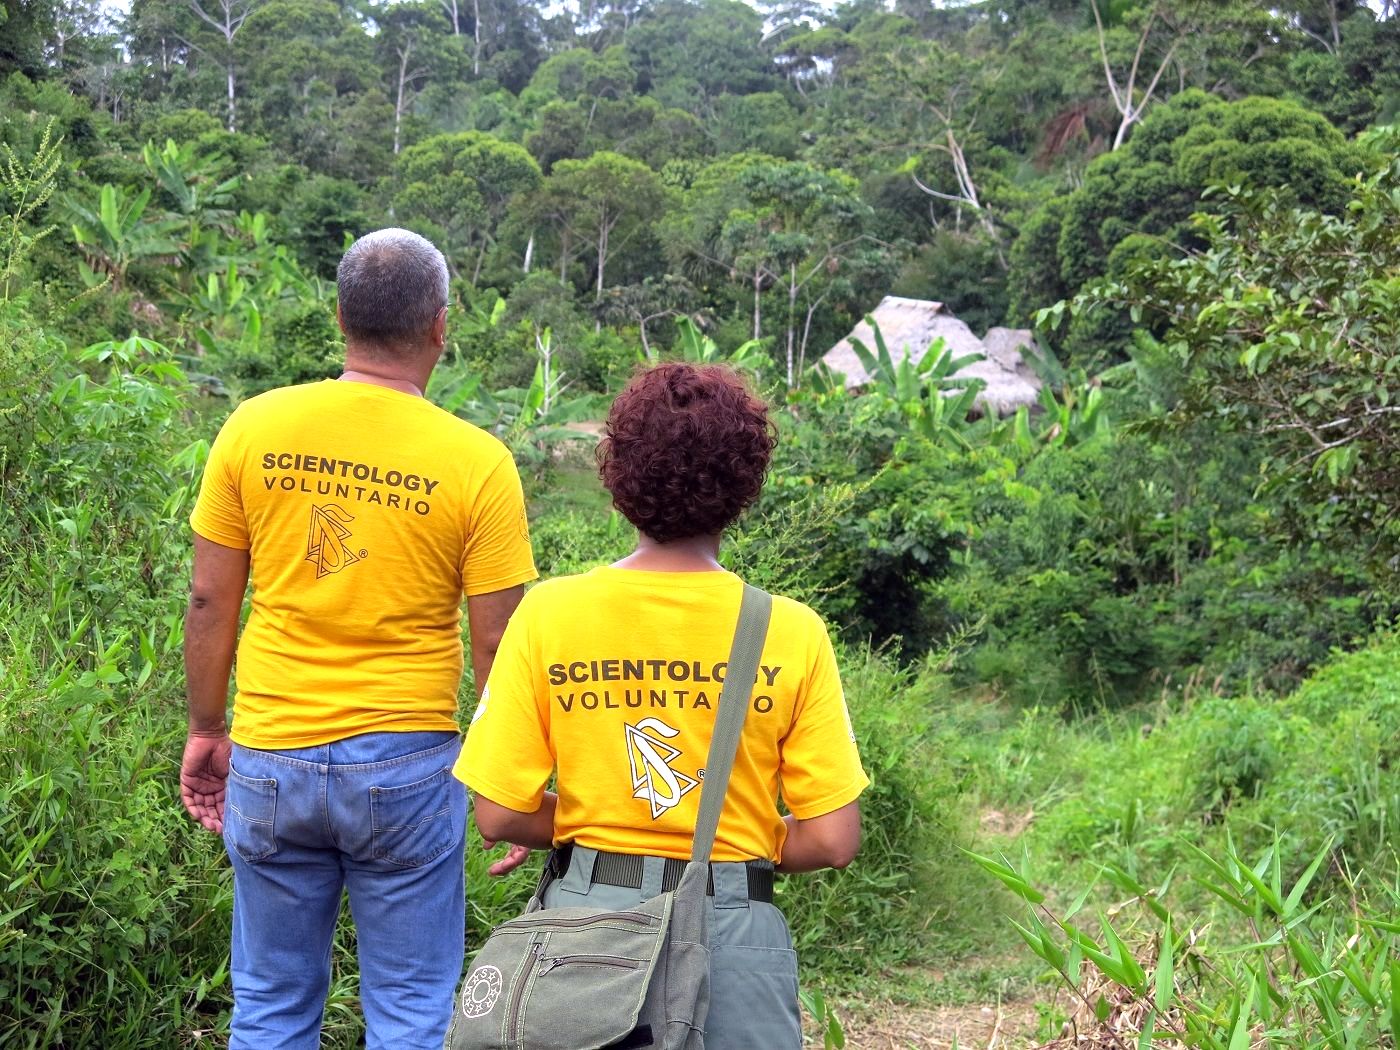 Scientology Volunteer Ministers Goodwill Tour members get their first glimpse of a village along the Amazon in Brazil.